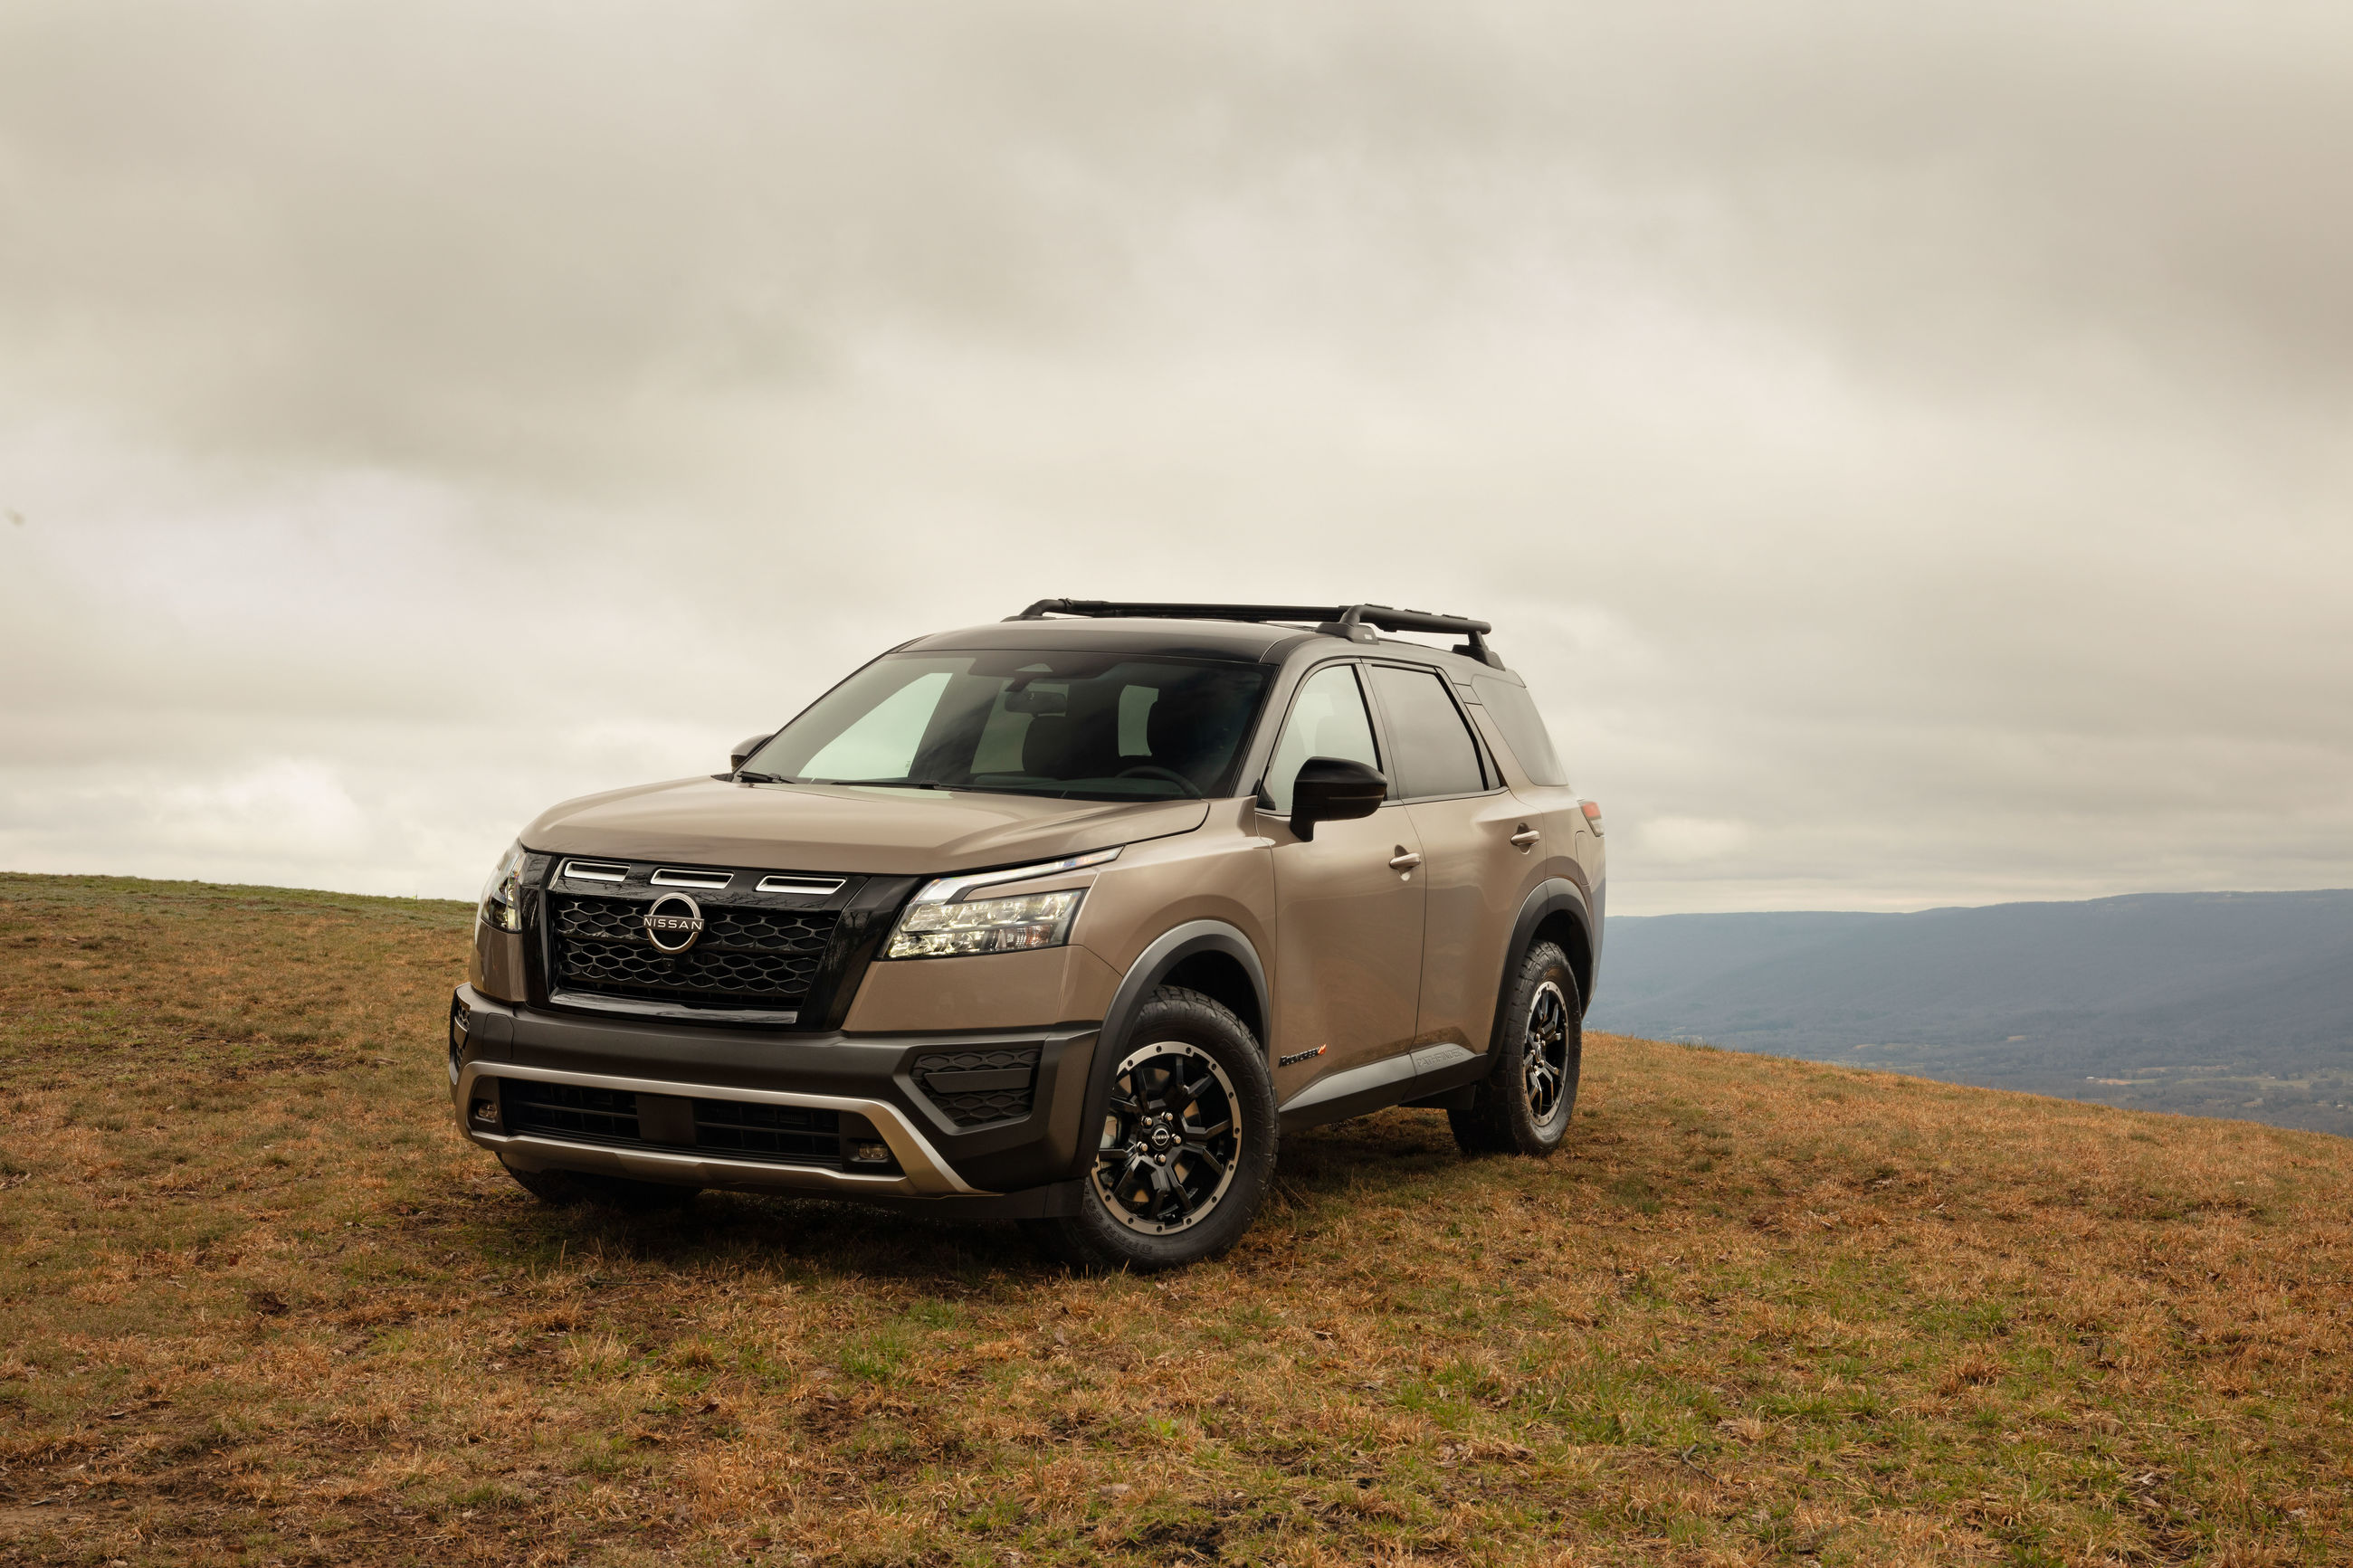 2023 Nissan Pathfinder Rock Creek – Every Available Photo, Release Date, Upgrades